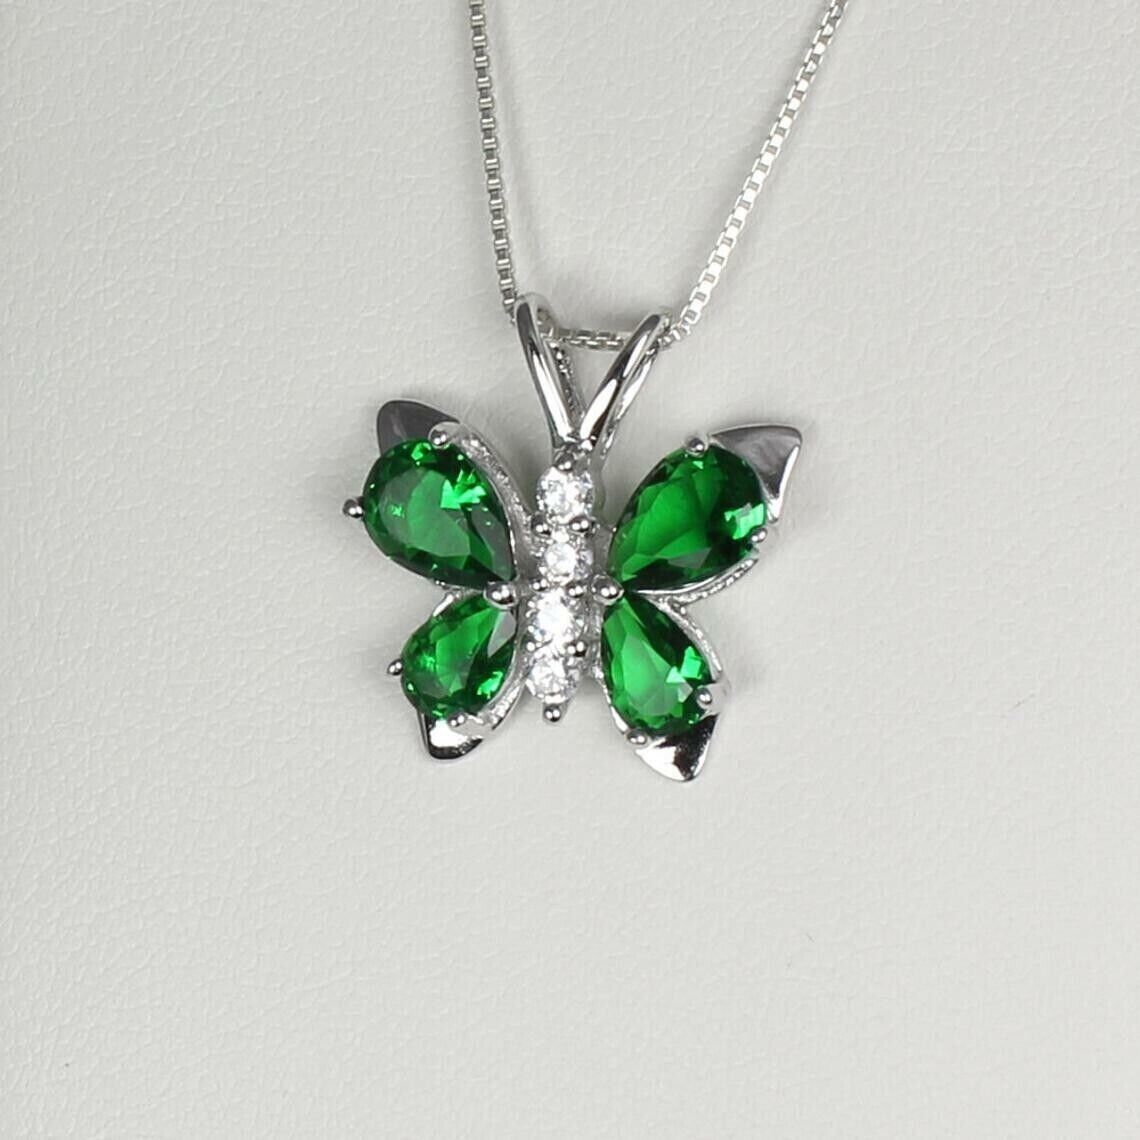 Check out 2 Ct Pear Cut Lab Created Green Emerald Butterfly Pendant 14K White Gold Finish ebay.com/itm/3556950586…

#butterflyPendent #925silver #unitedstates #unitedkingdon #birthdaygift #partywear